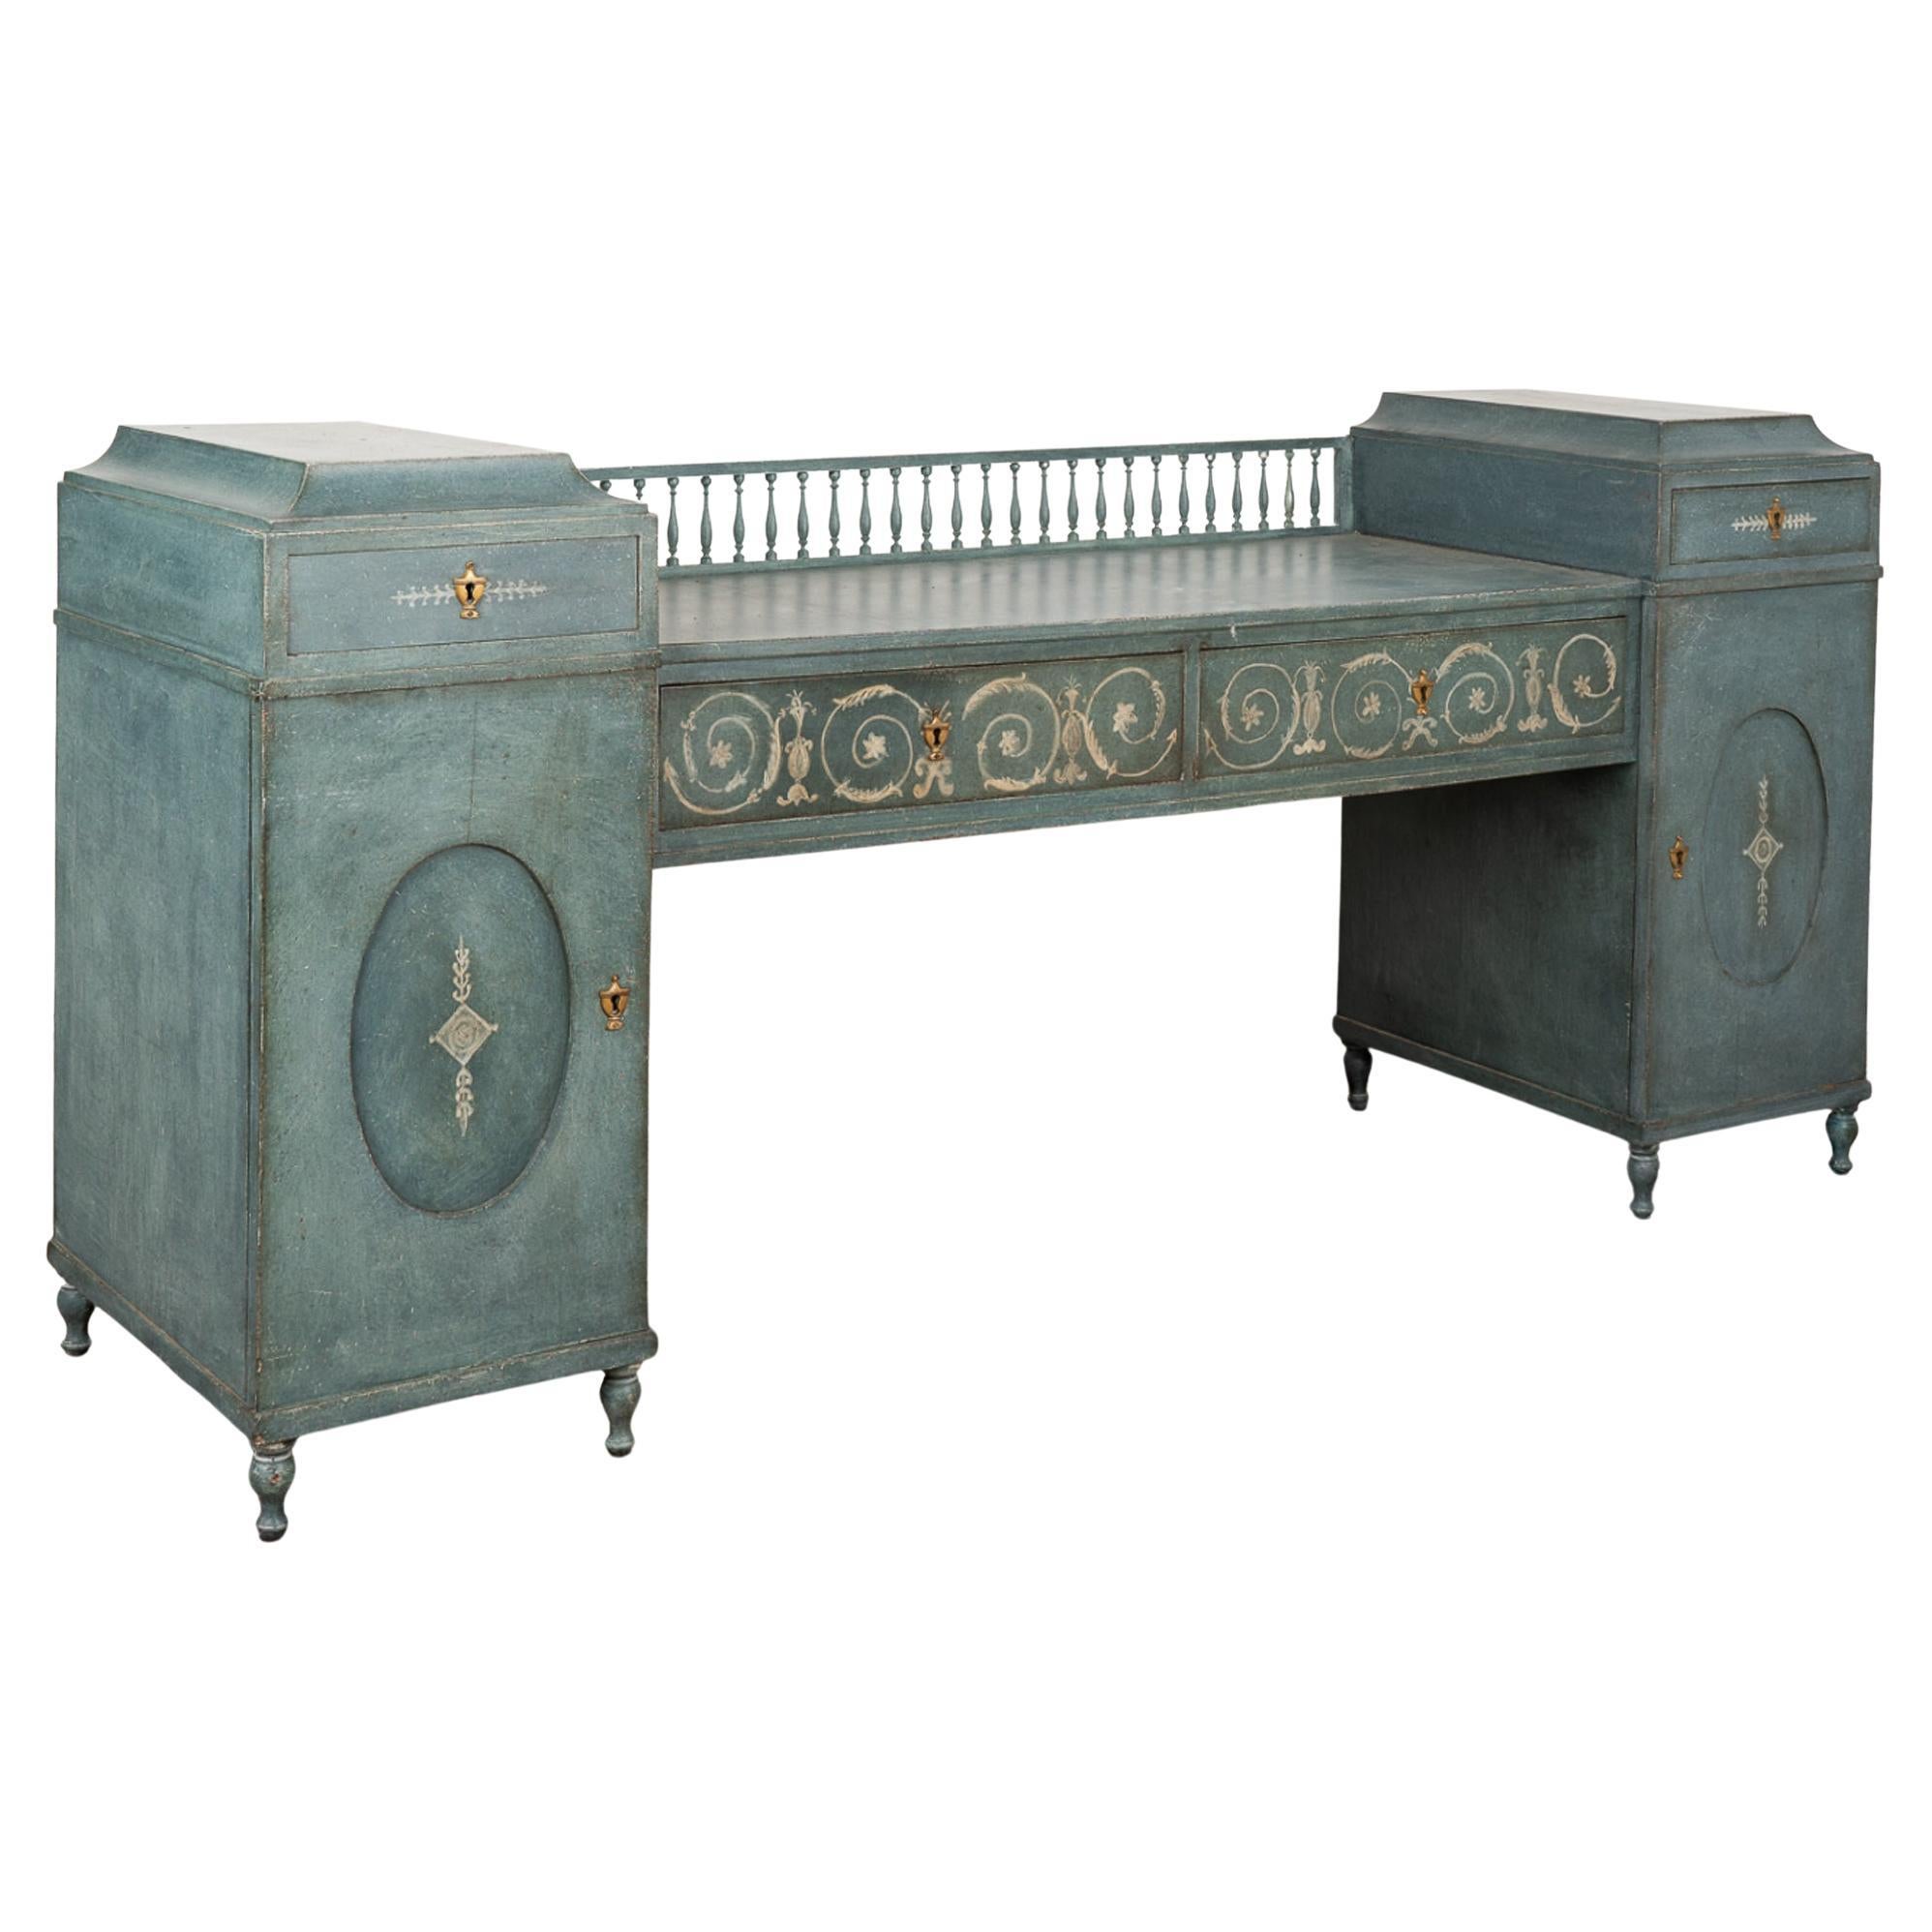 Blue Painted Sideboard Buffet, England circa 1820-40